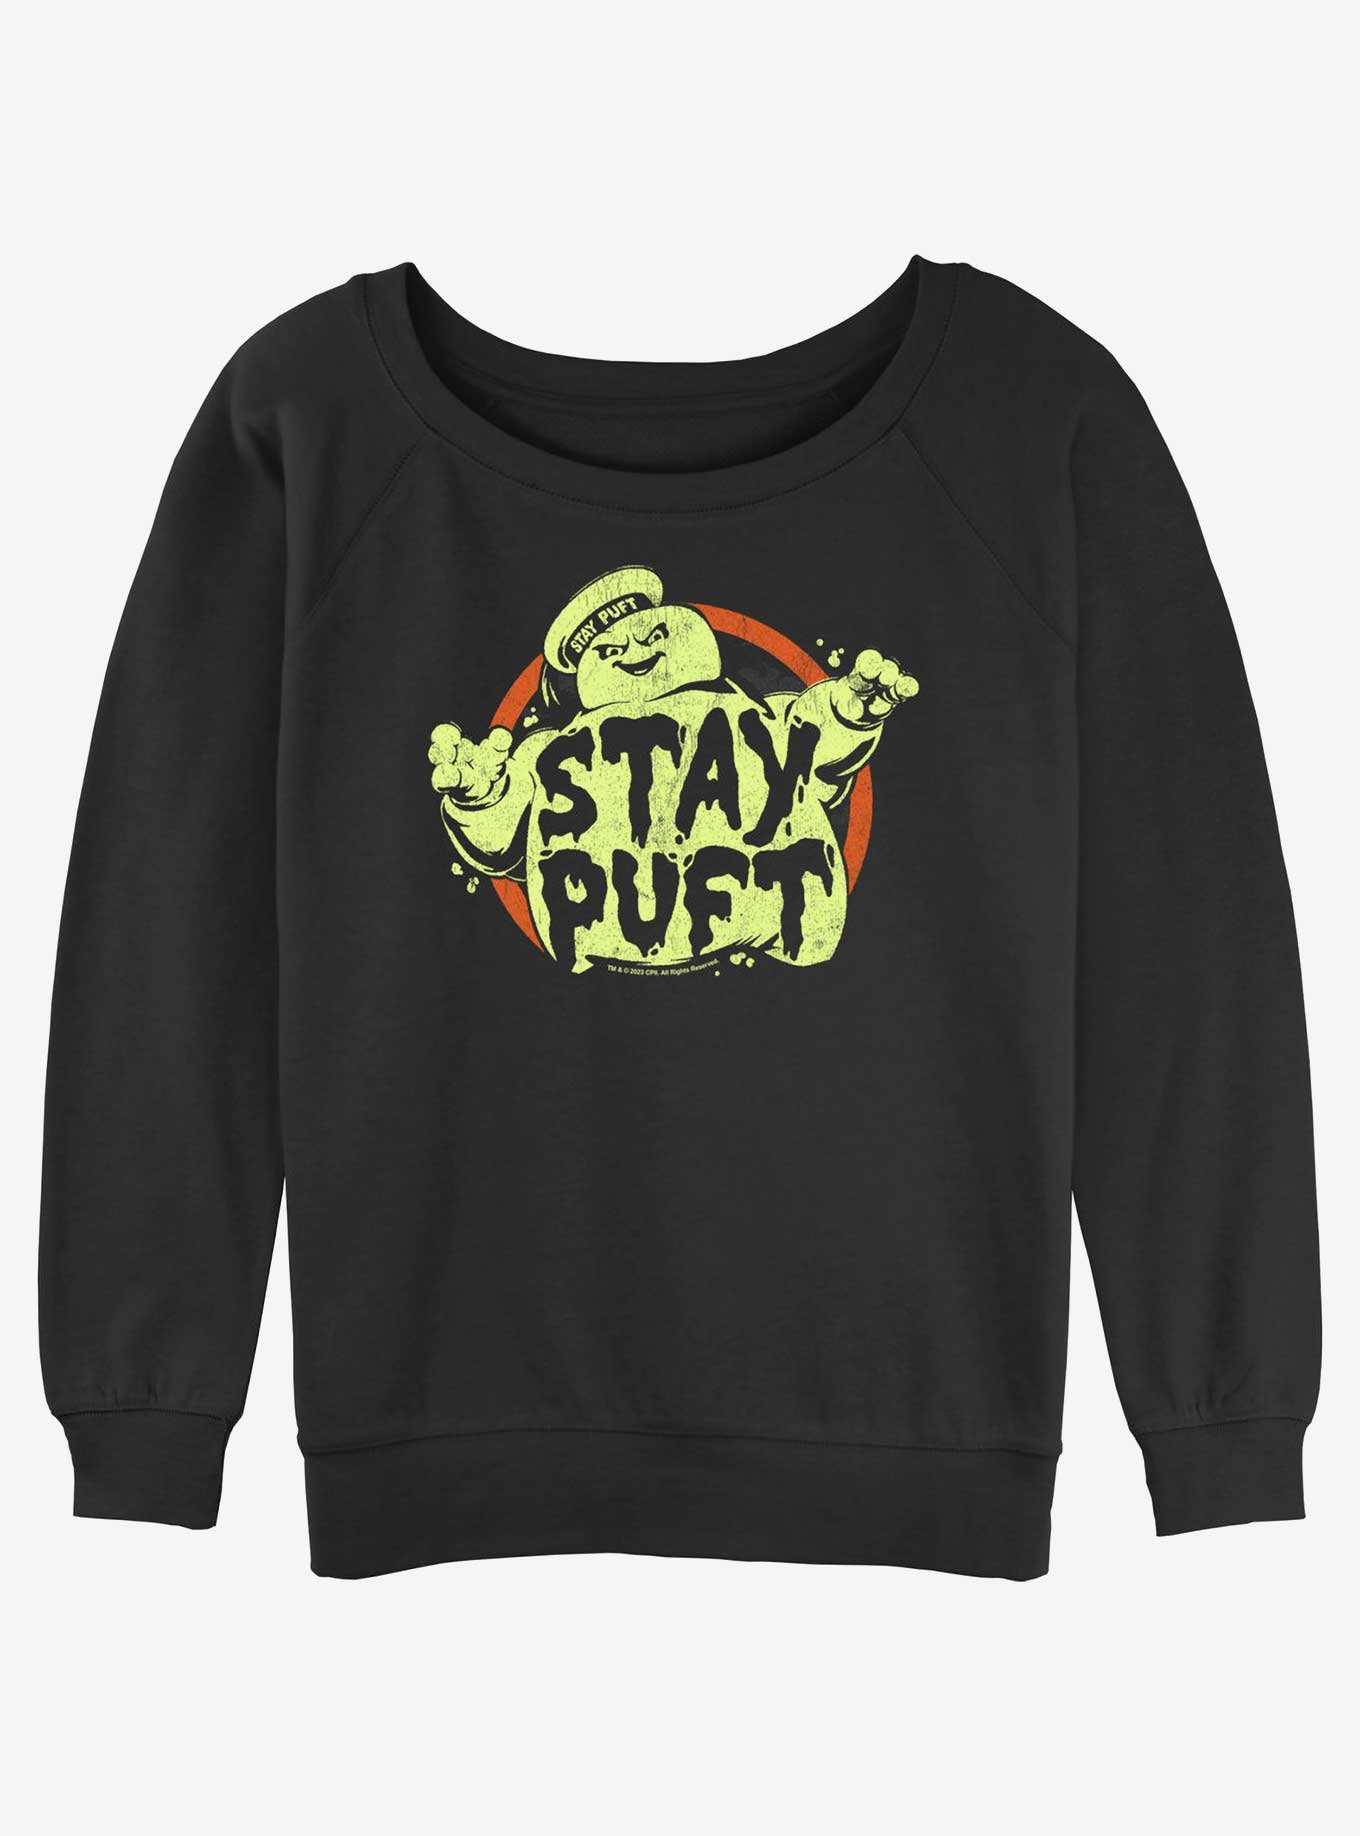 Ghostbusters Staying Puft Girls Slouchy Sweatshirt, , hi-res